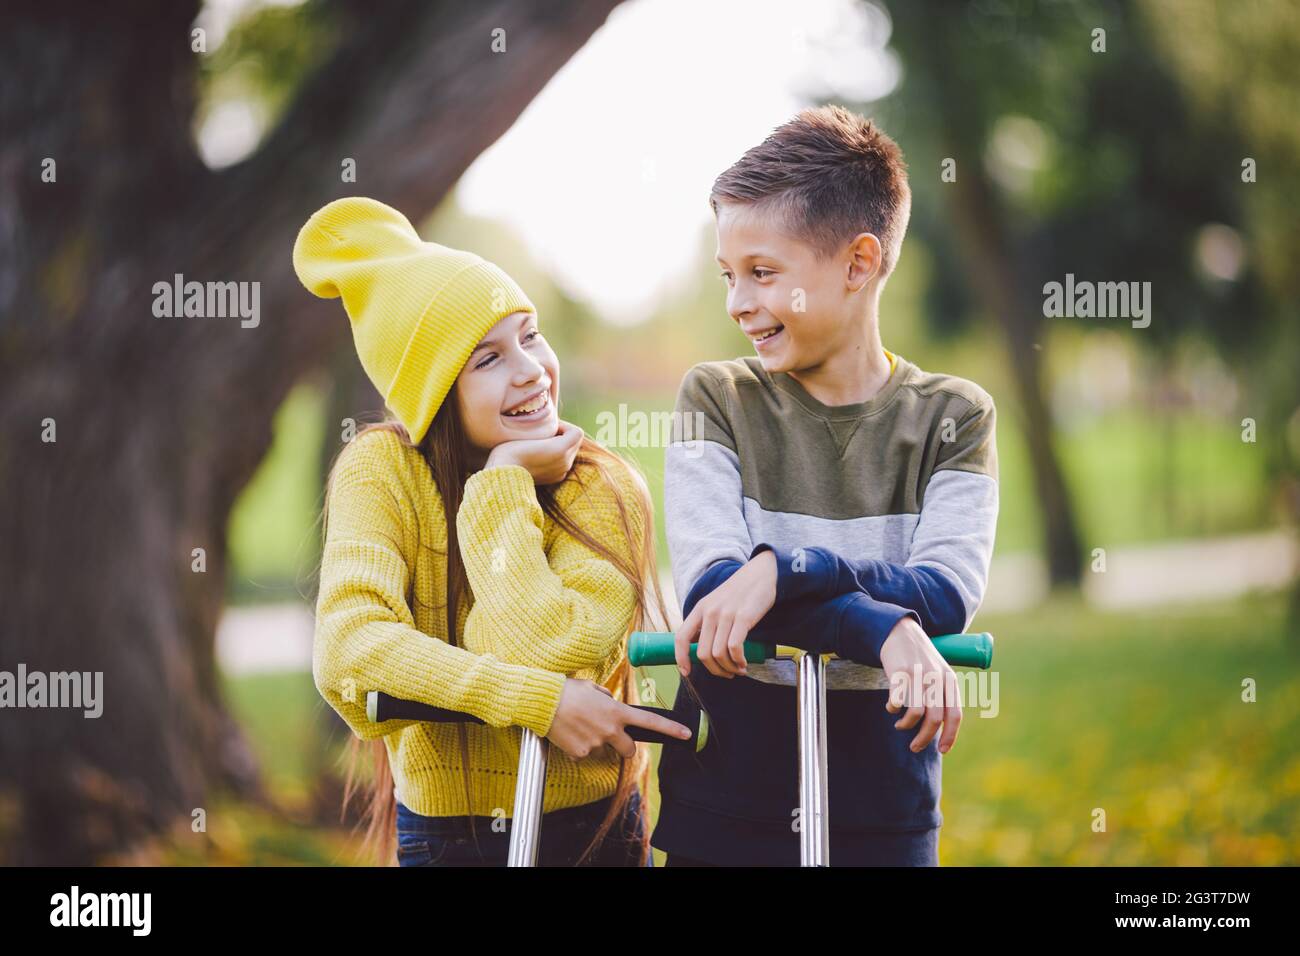 Twins 10 years old in bright clothes spend time actively together in autumn park riding kick scooters. Happy children. Eco trans Stock Photo